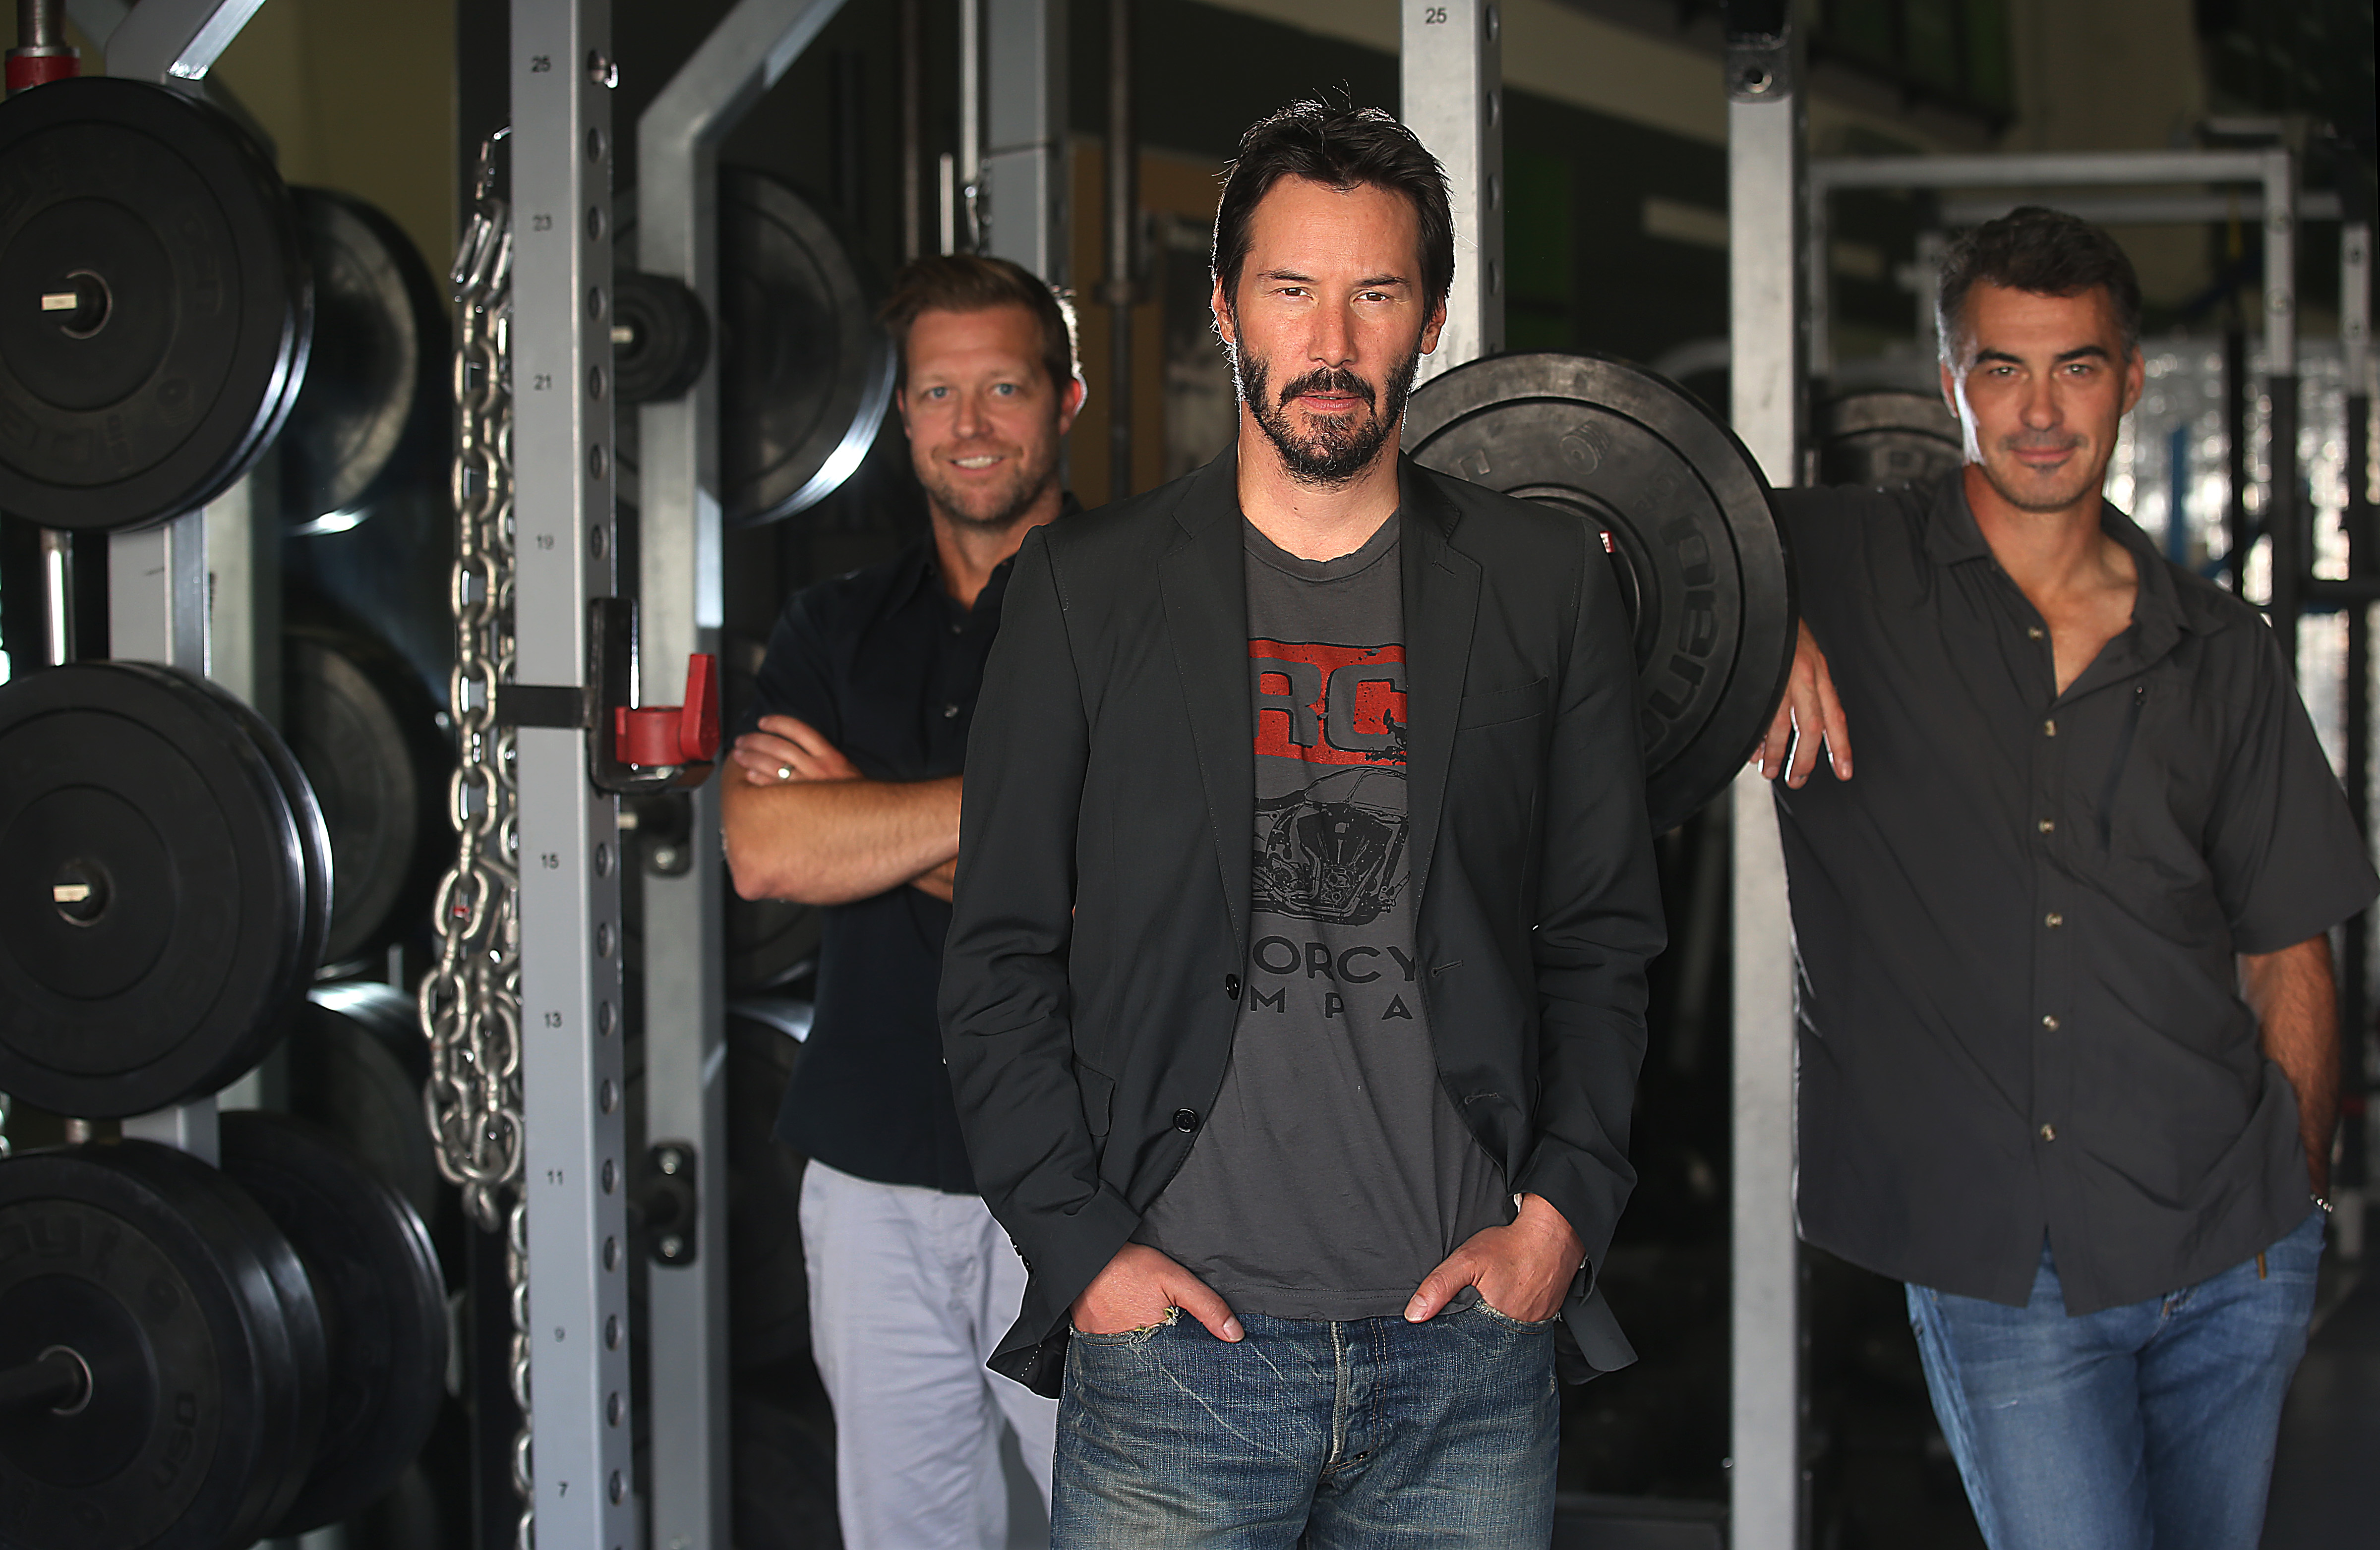 Keanu Reeves posing for a picture with stunt coordinators David Leitch and Chad Stahelski for "John Wick" in Inglewood, California on October 7, 2014 | Source: Getty Images